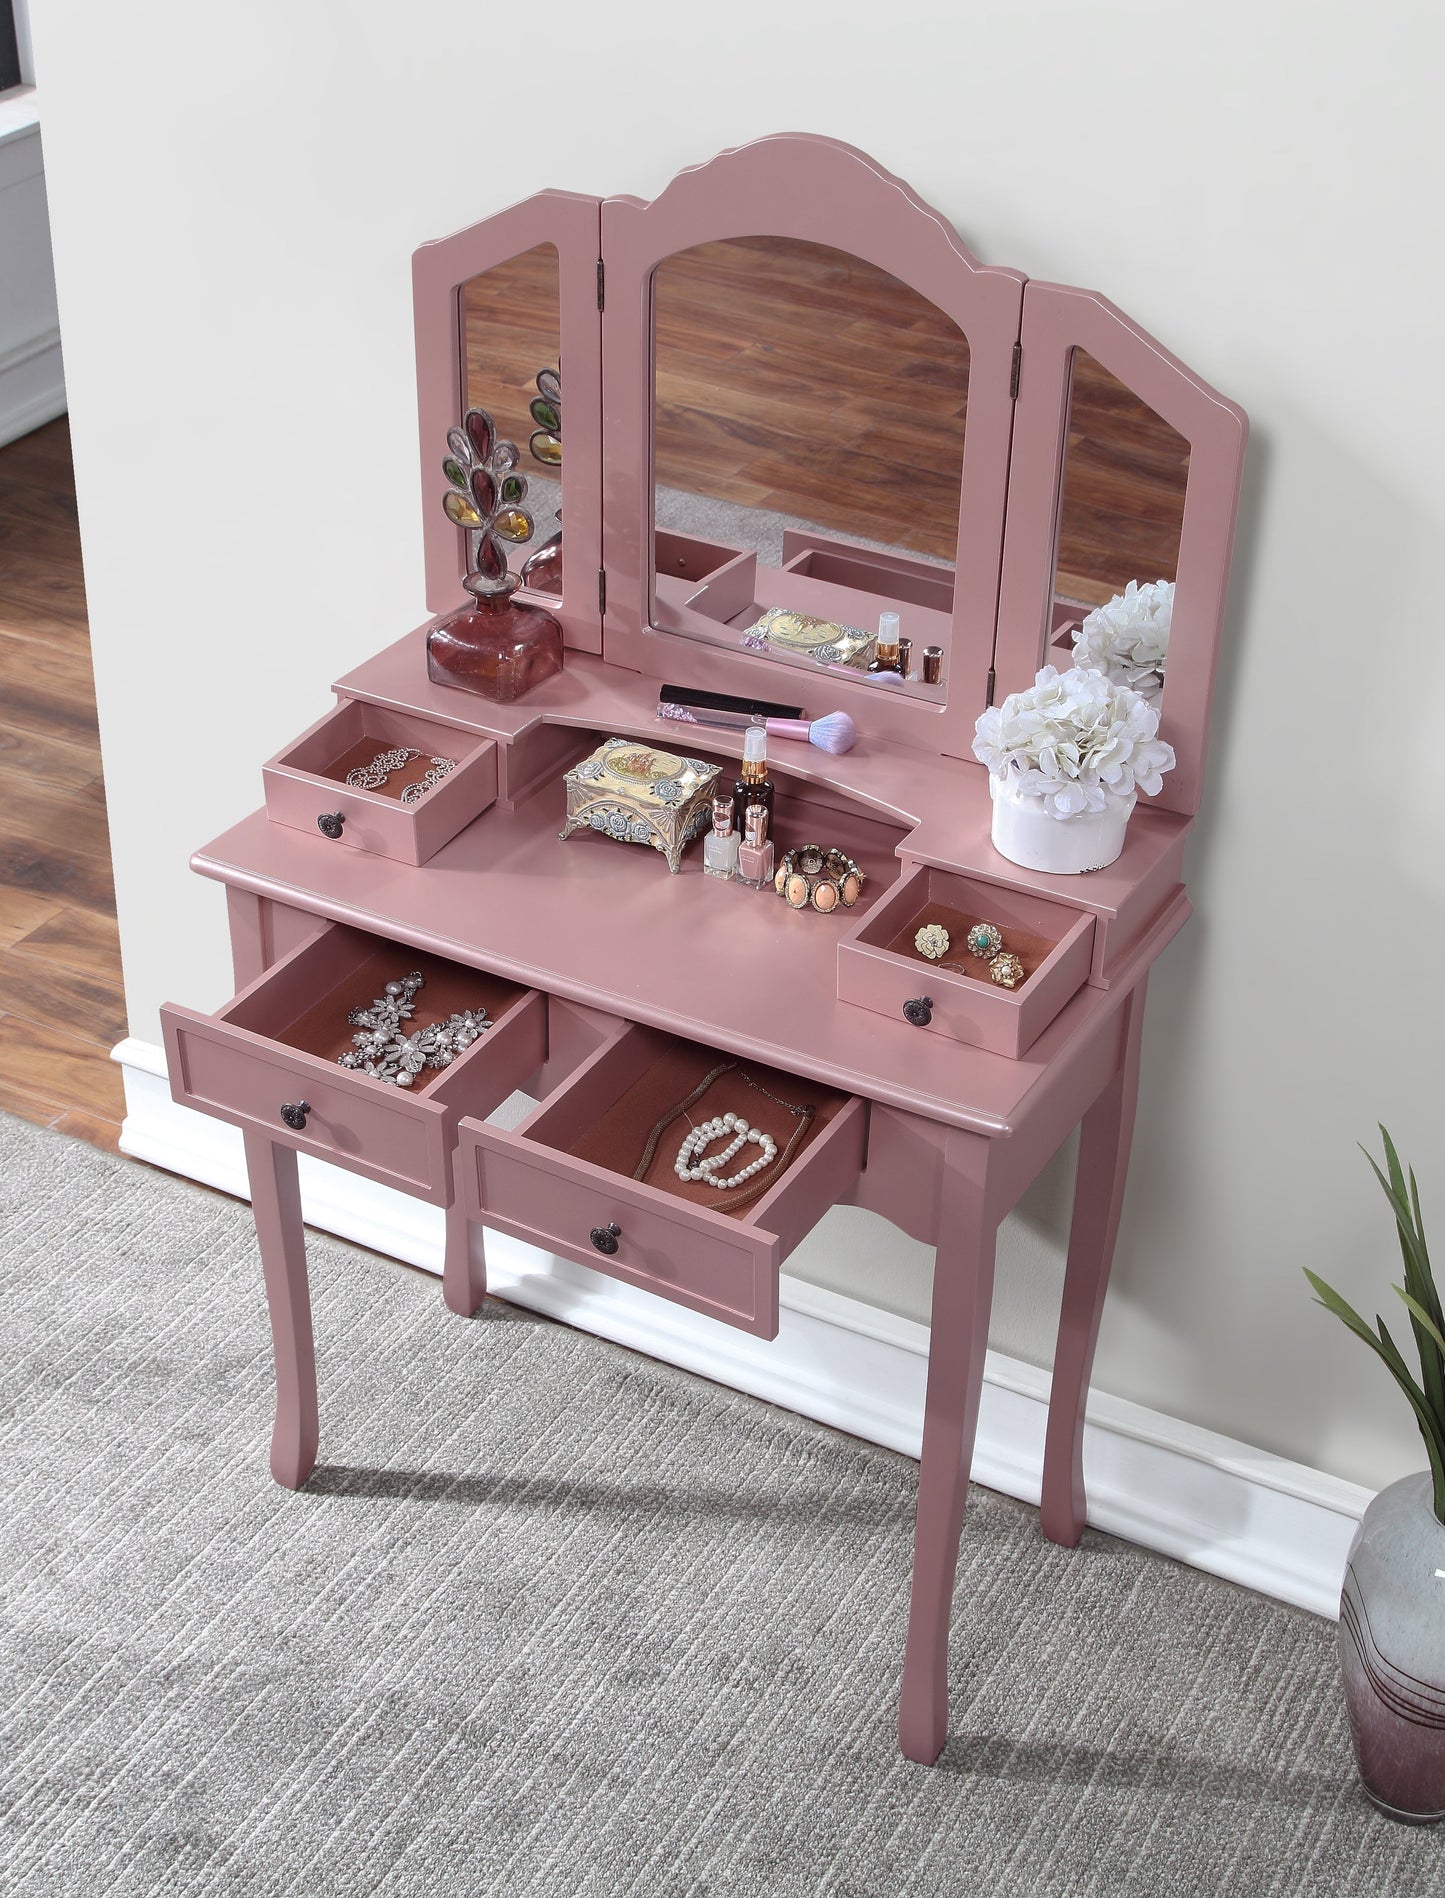 Sanlo Wooden Vanity Make Up Table and Stool Set, Rose Gold